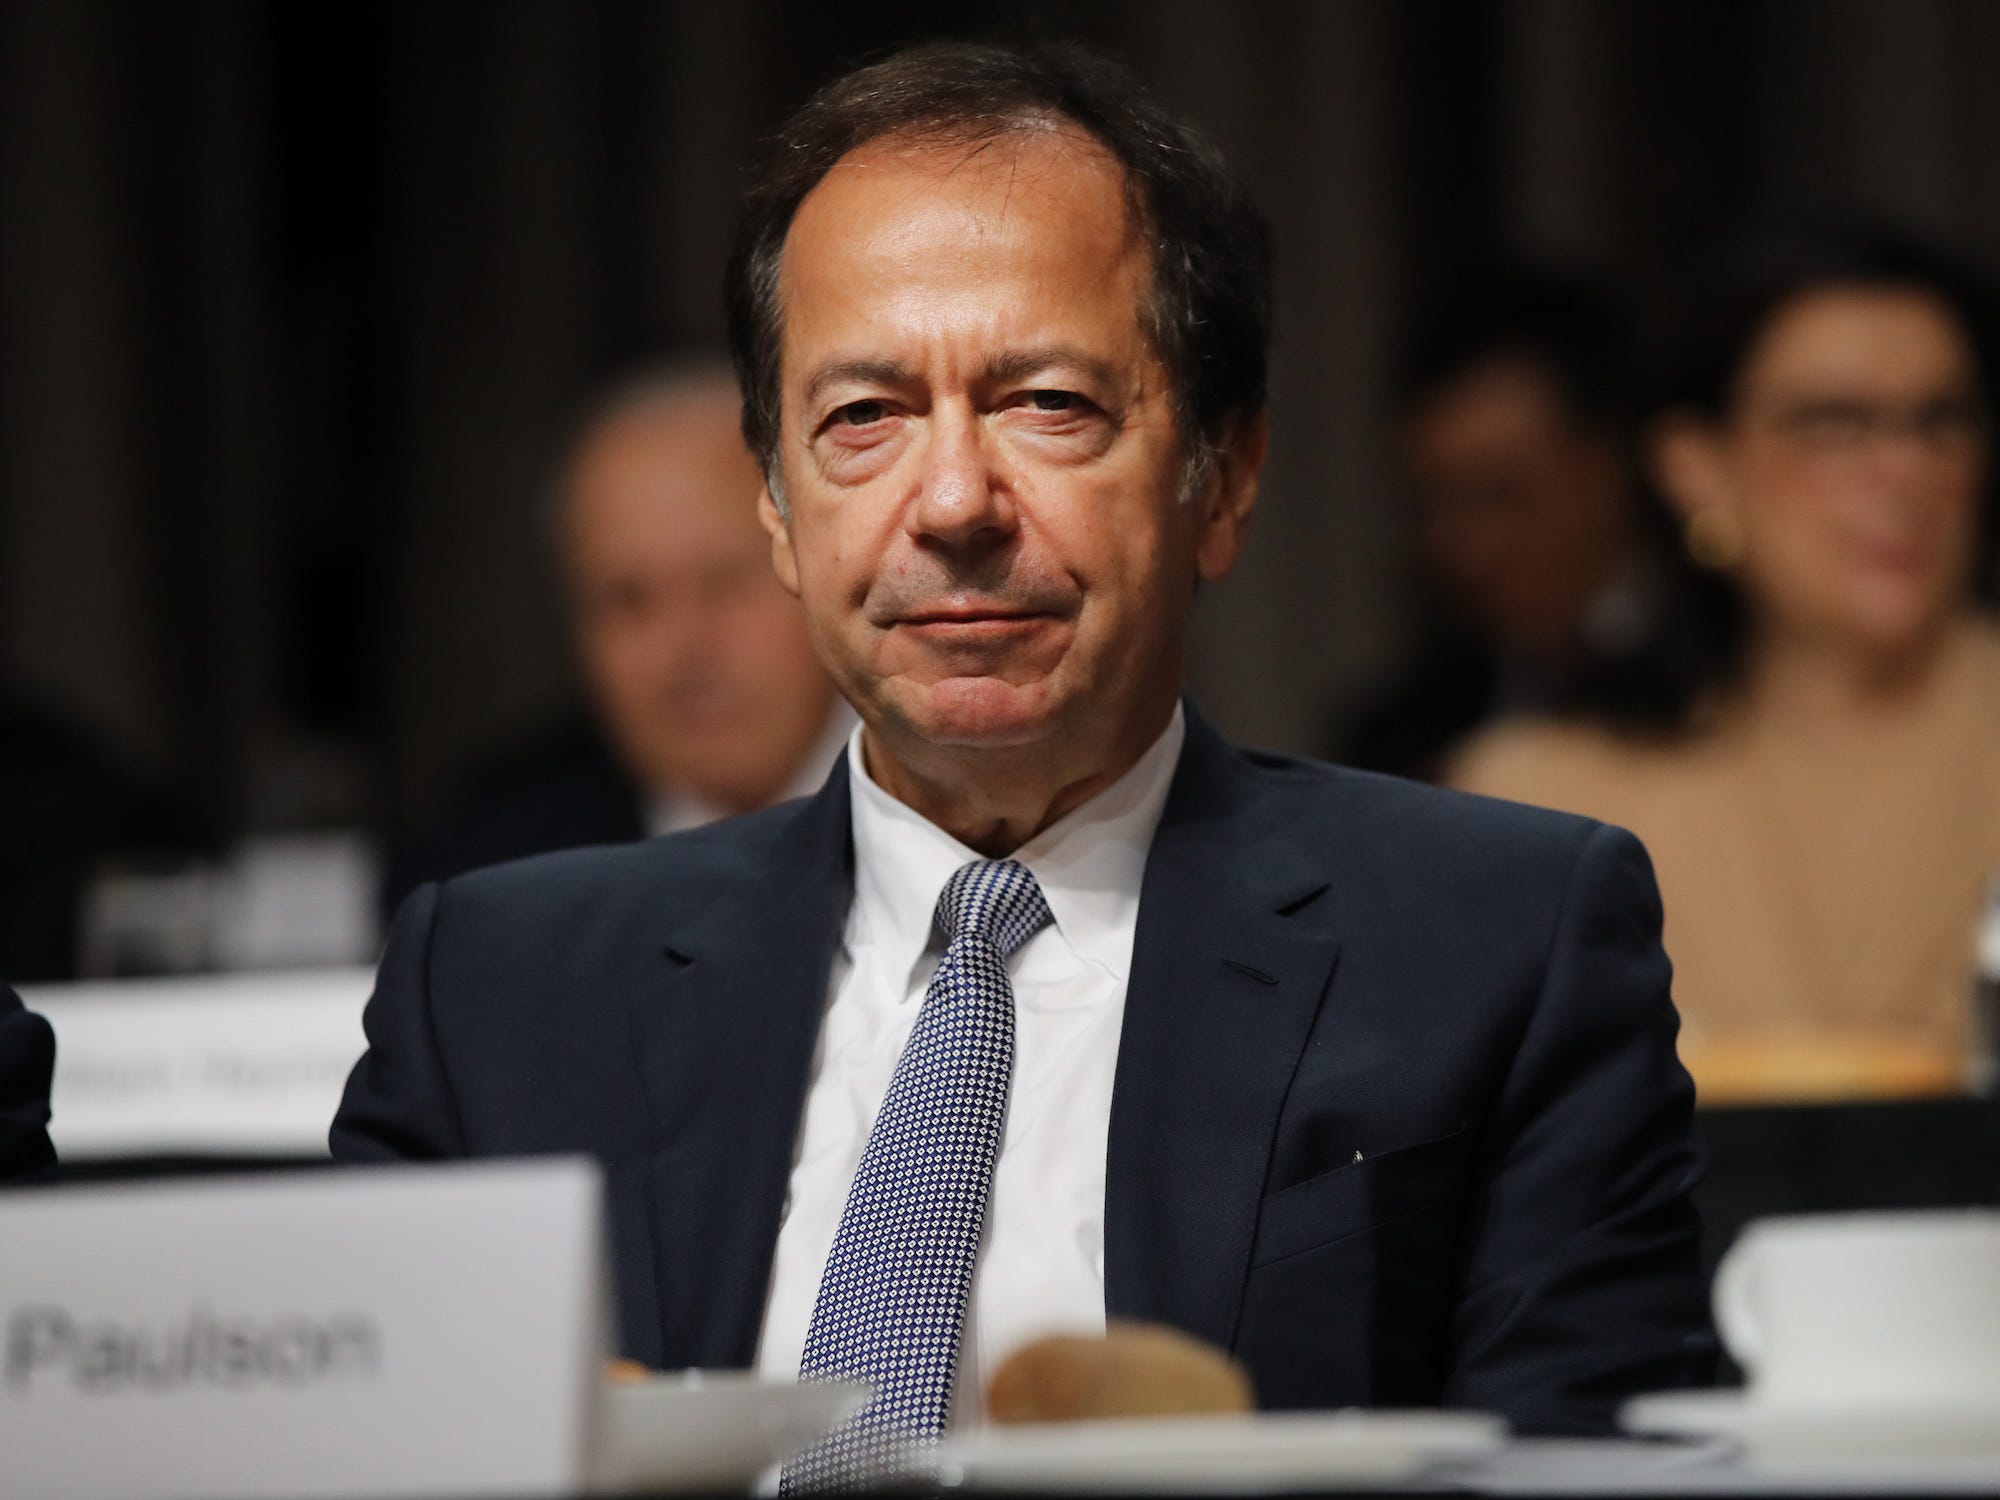 <p>John Paulson, a billionaire hedge fund manager, has contributed $806,300 to the Trump 47 Committee.</p><p>He's long been an associate of the former president and has advised him an economic matters. Bloomberg <a href="https://www.bloomberg.com/news/articles/2024-05-17/donald-trump-treasury-pick-money-machine-john-paulson-or-ex-soros-star-bessent">recently reported</a> that he could serve as Treasury Secretary under a second Trump administration.</p><p>In April, Paulson hosted Trump and his wife, Melania, for a fundraiser at his Palm Beach home. </p><p>That event, attended by several other billionaires on this list, raised more than $50 million, according to the campaign.</p>